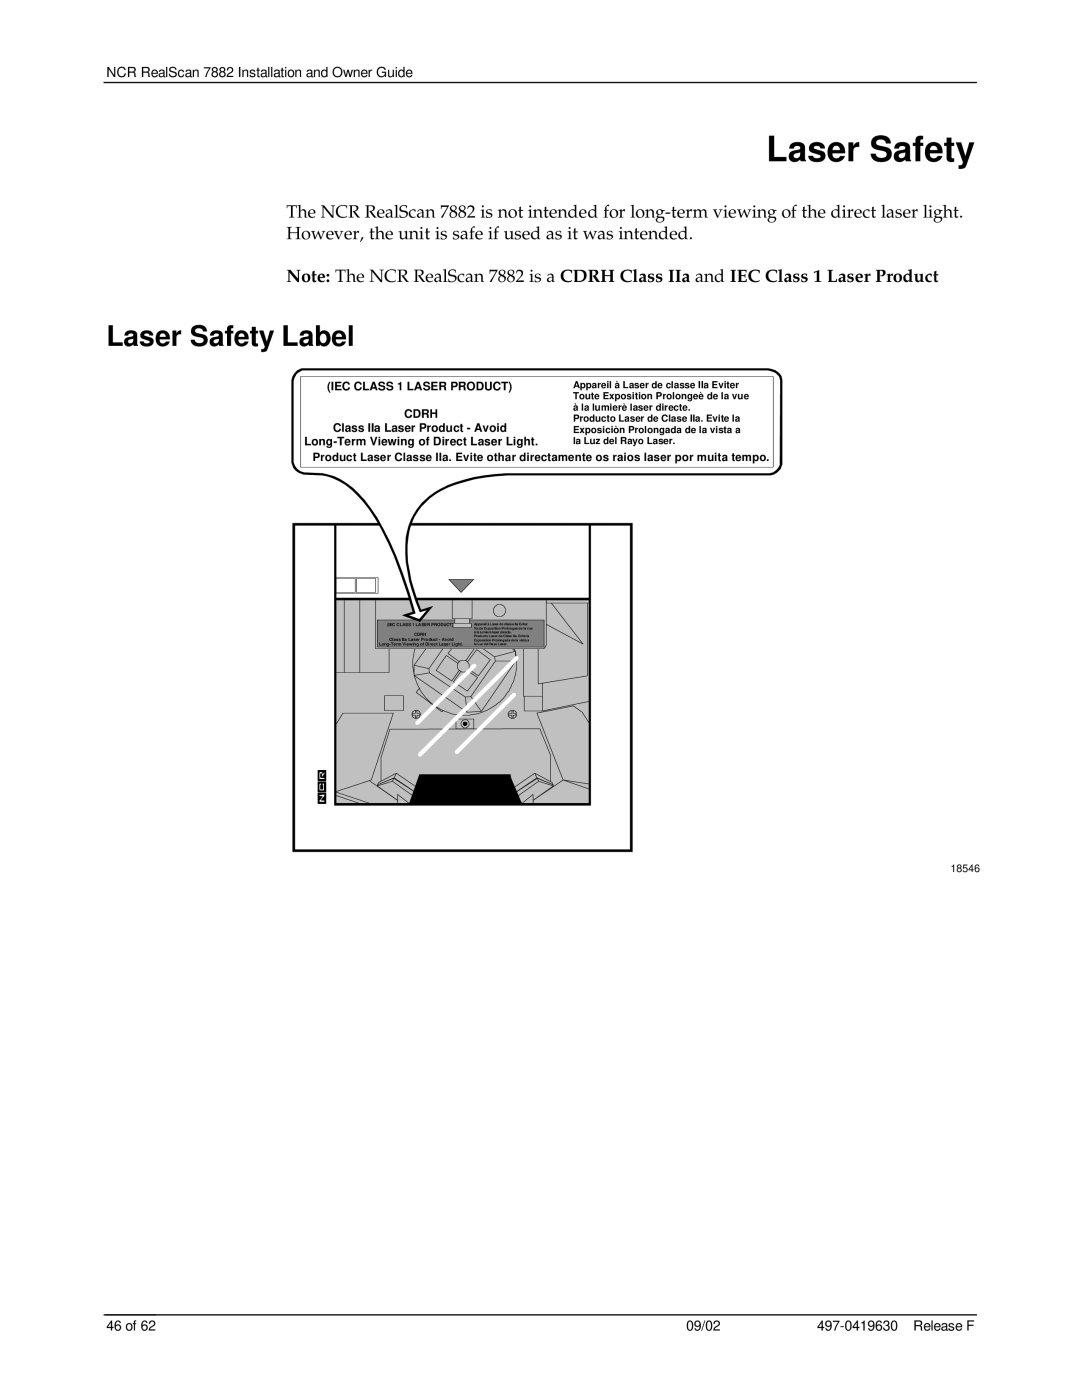 NCR 7882 manual Laser Safety Label, IEC CLASS 1 LASER PRODUCT CDRH Class IIa Laser Product - Avoid, 18546 